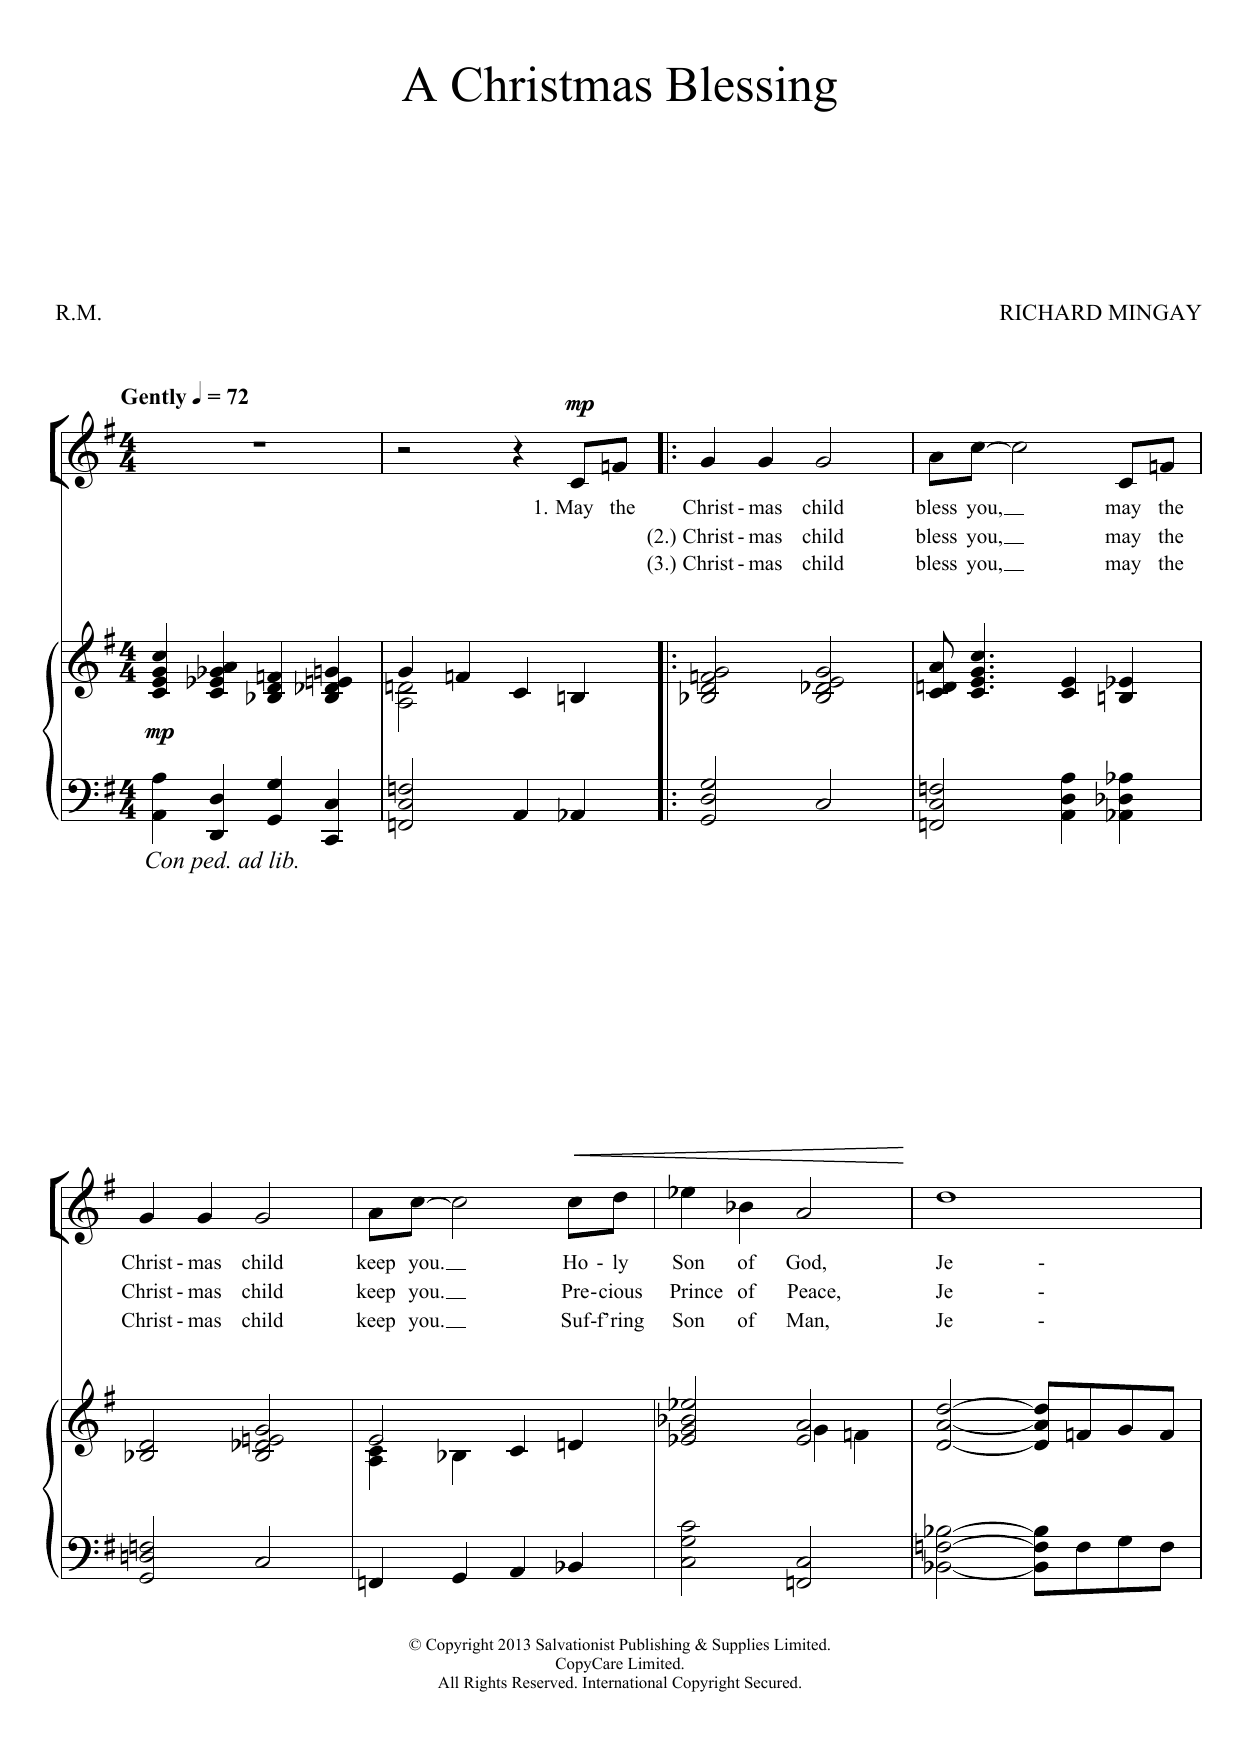 Download The Salvation Army A Christmas Blessing Sheet Music